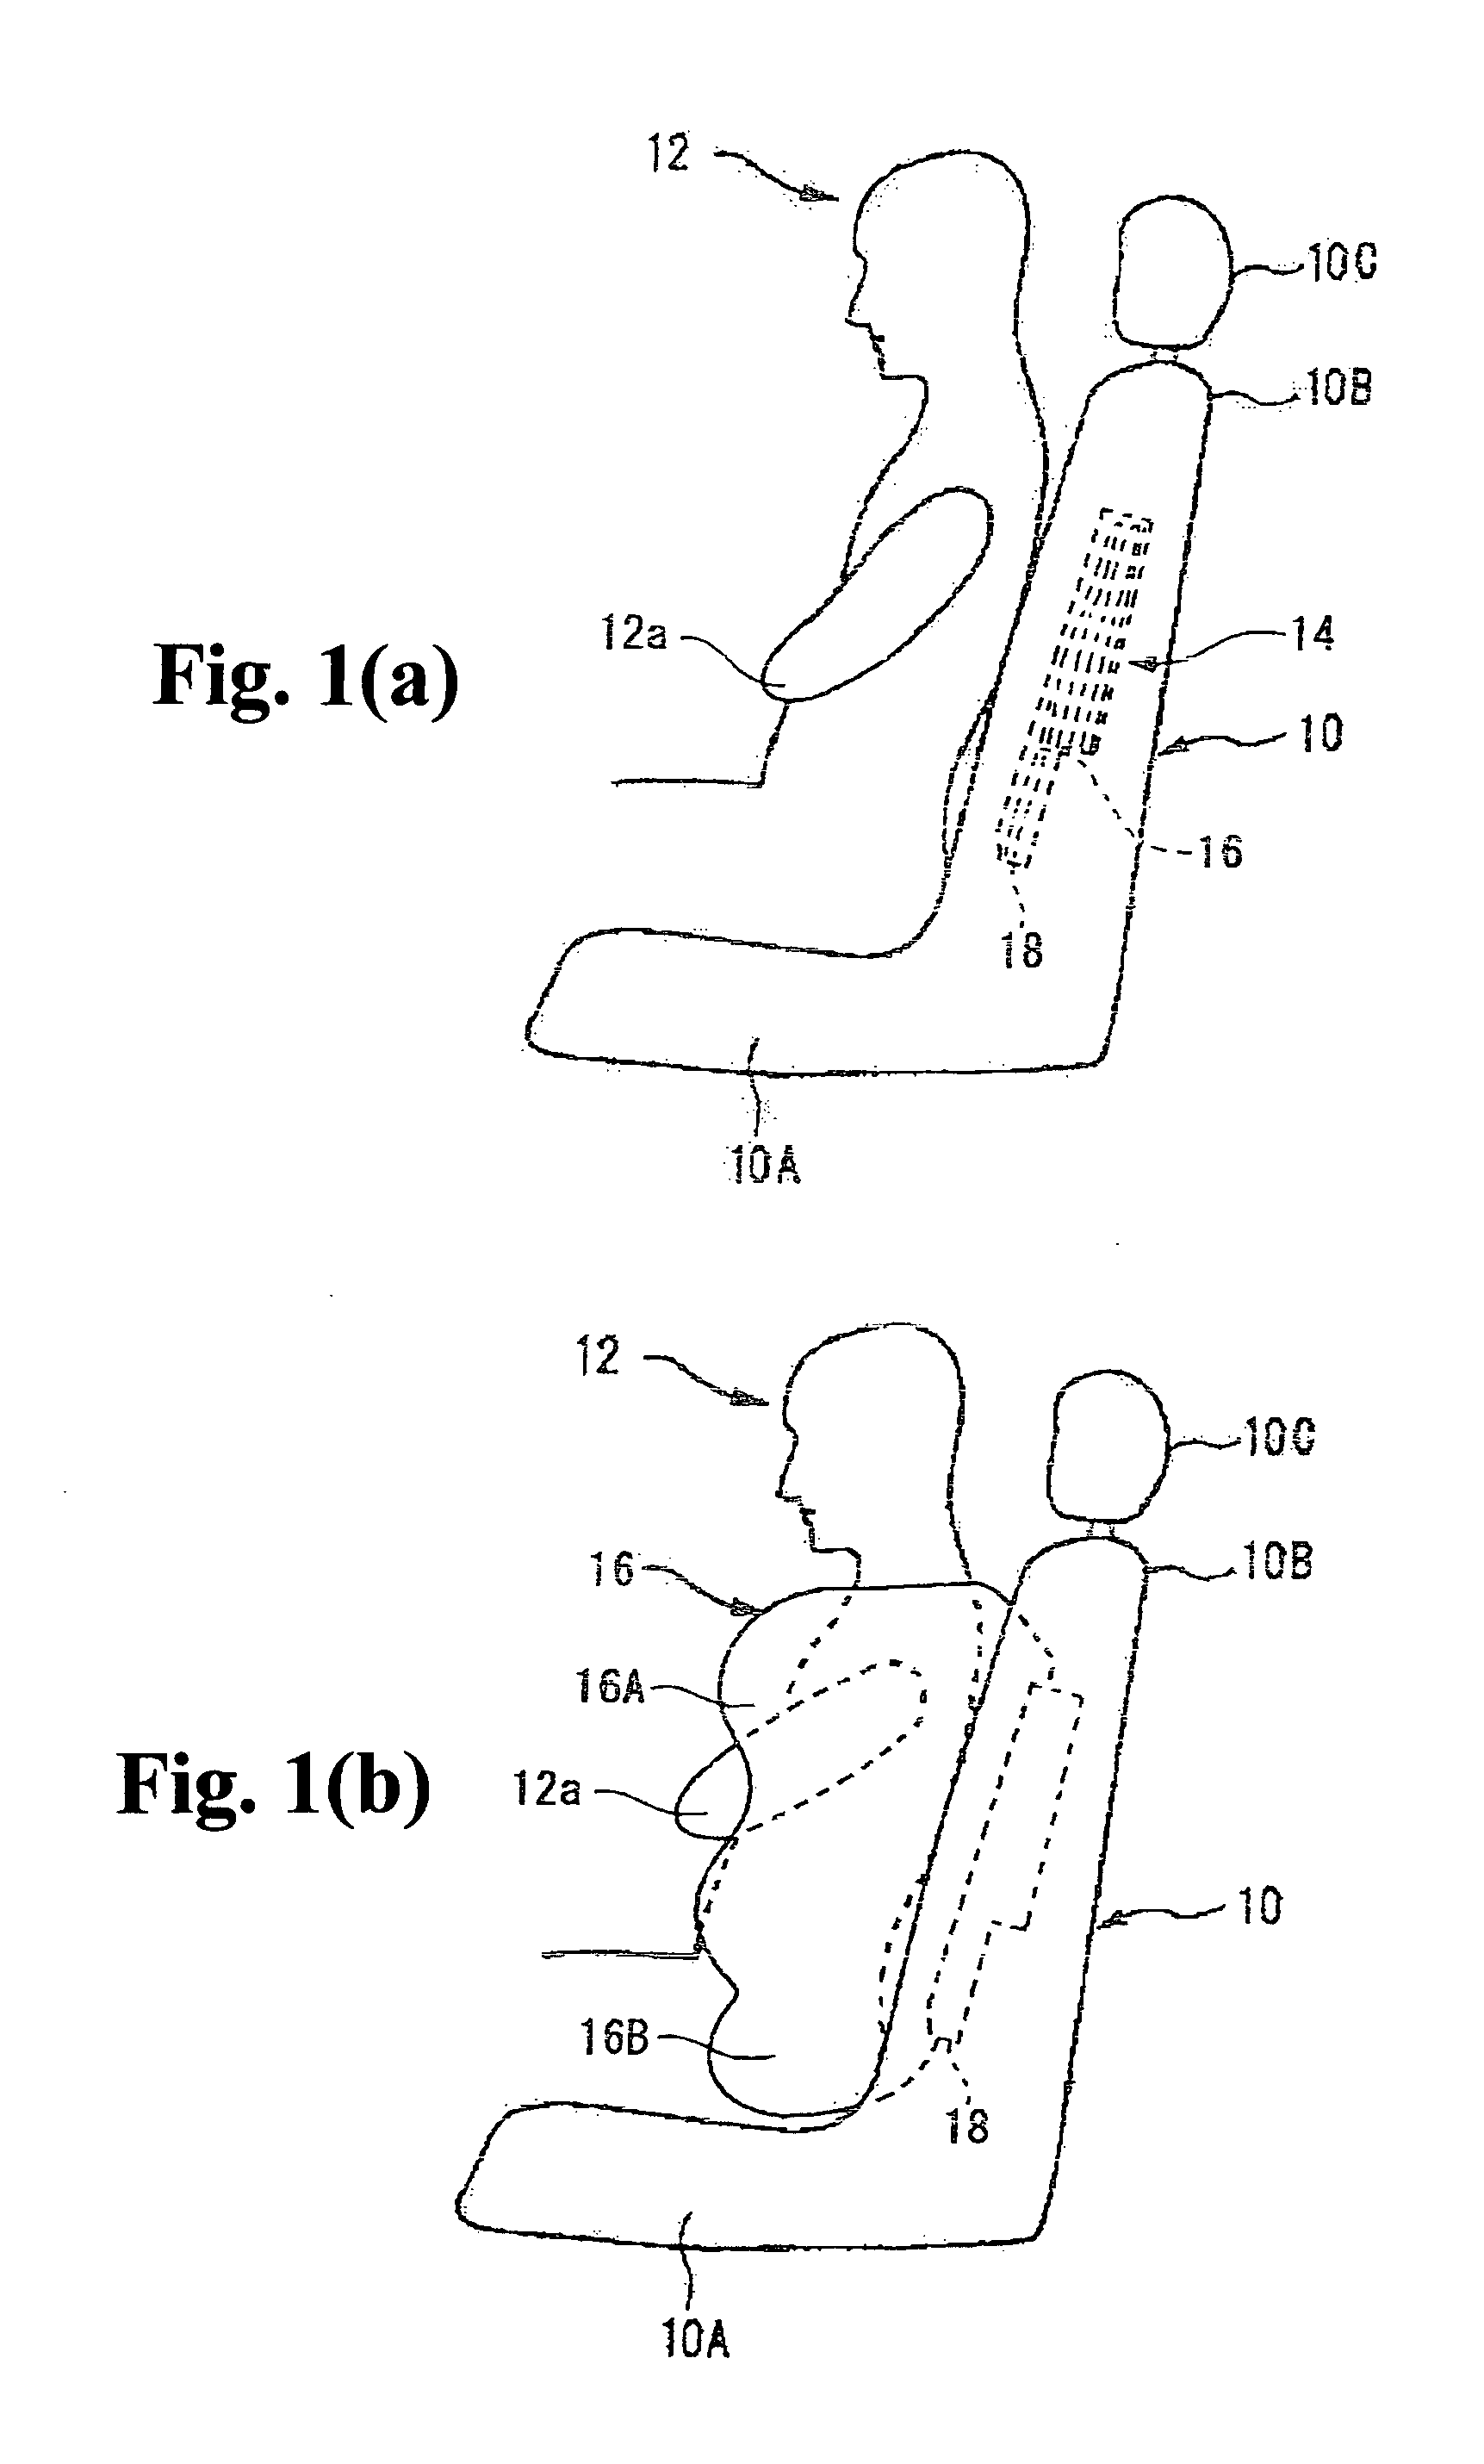 Side airbag apparatus, motor vehicle seat, and gas distributor of inflator